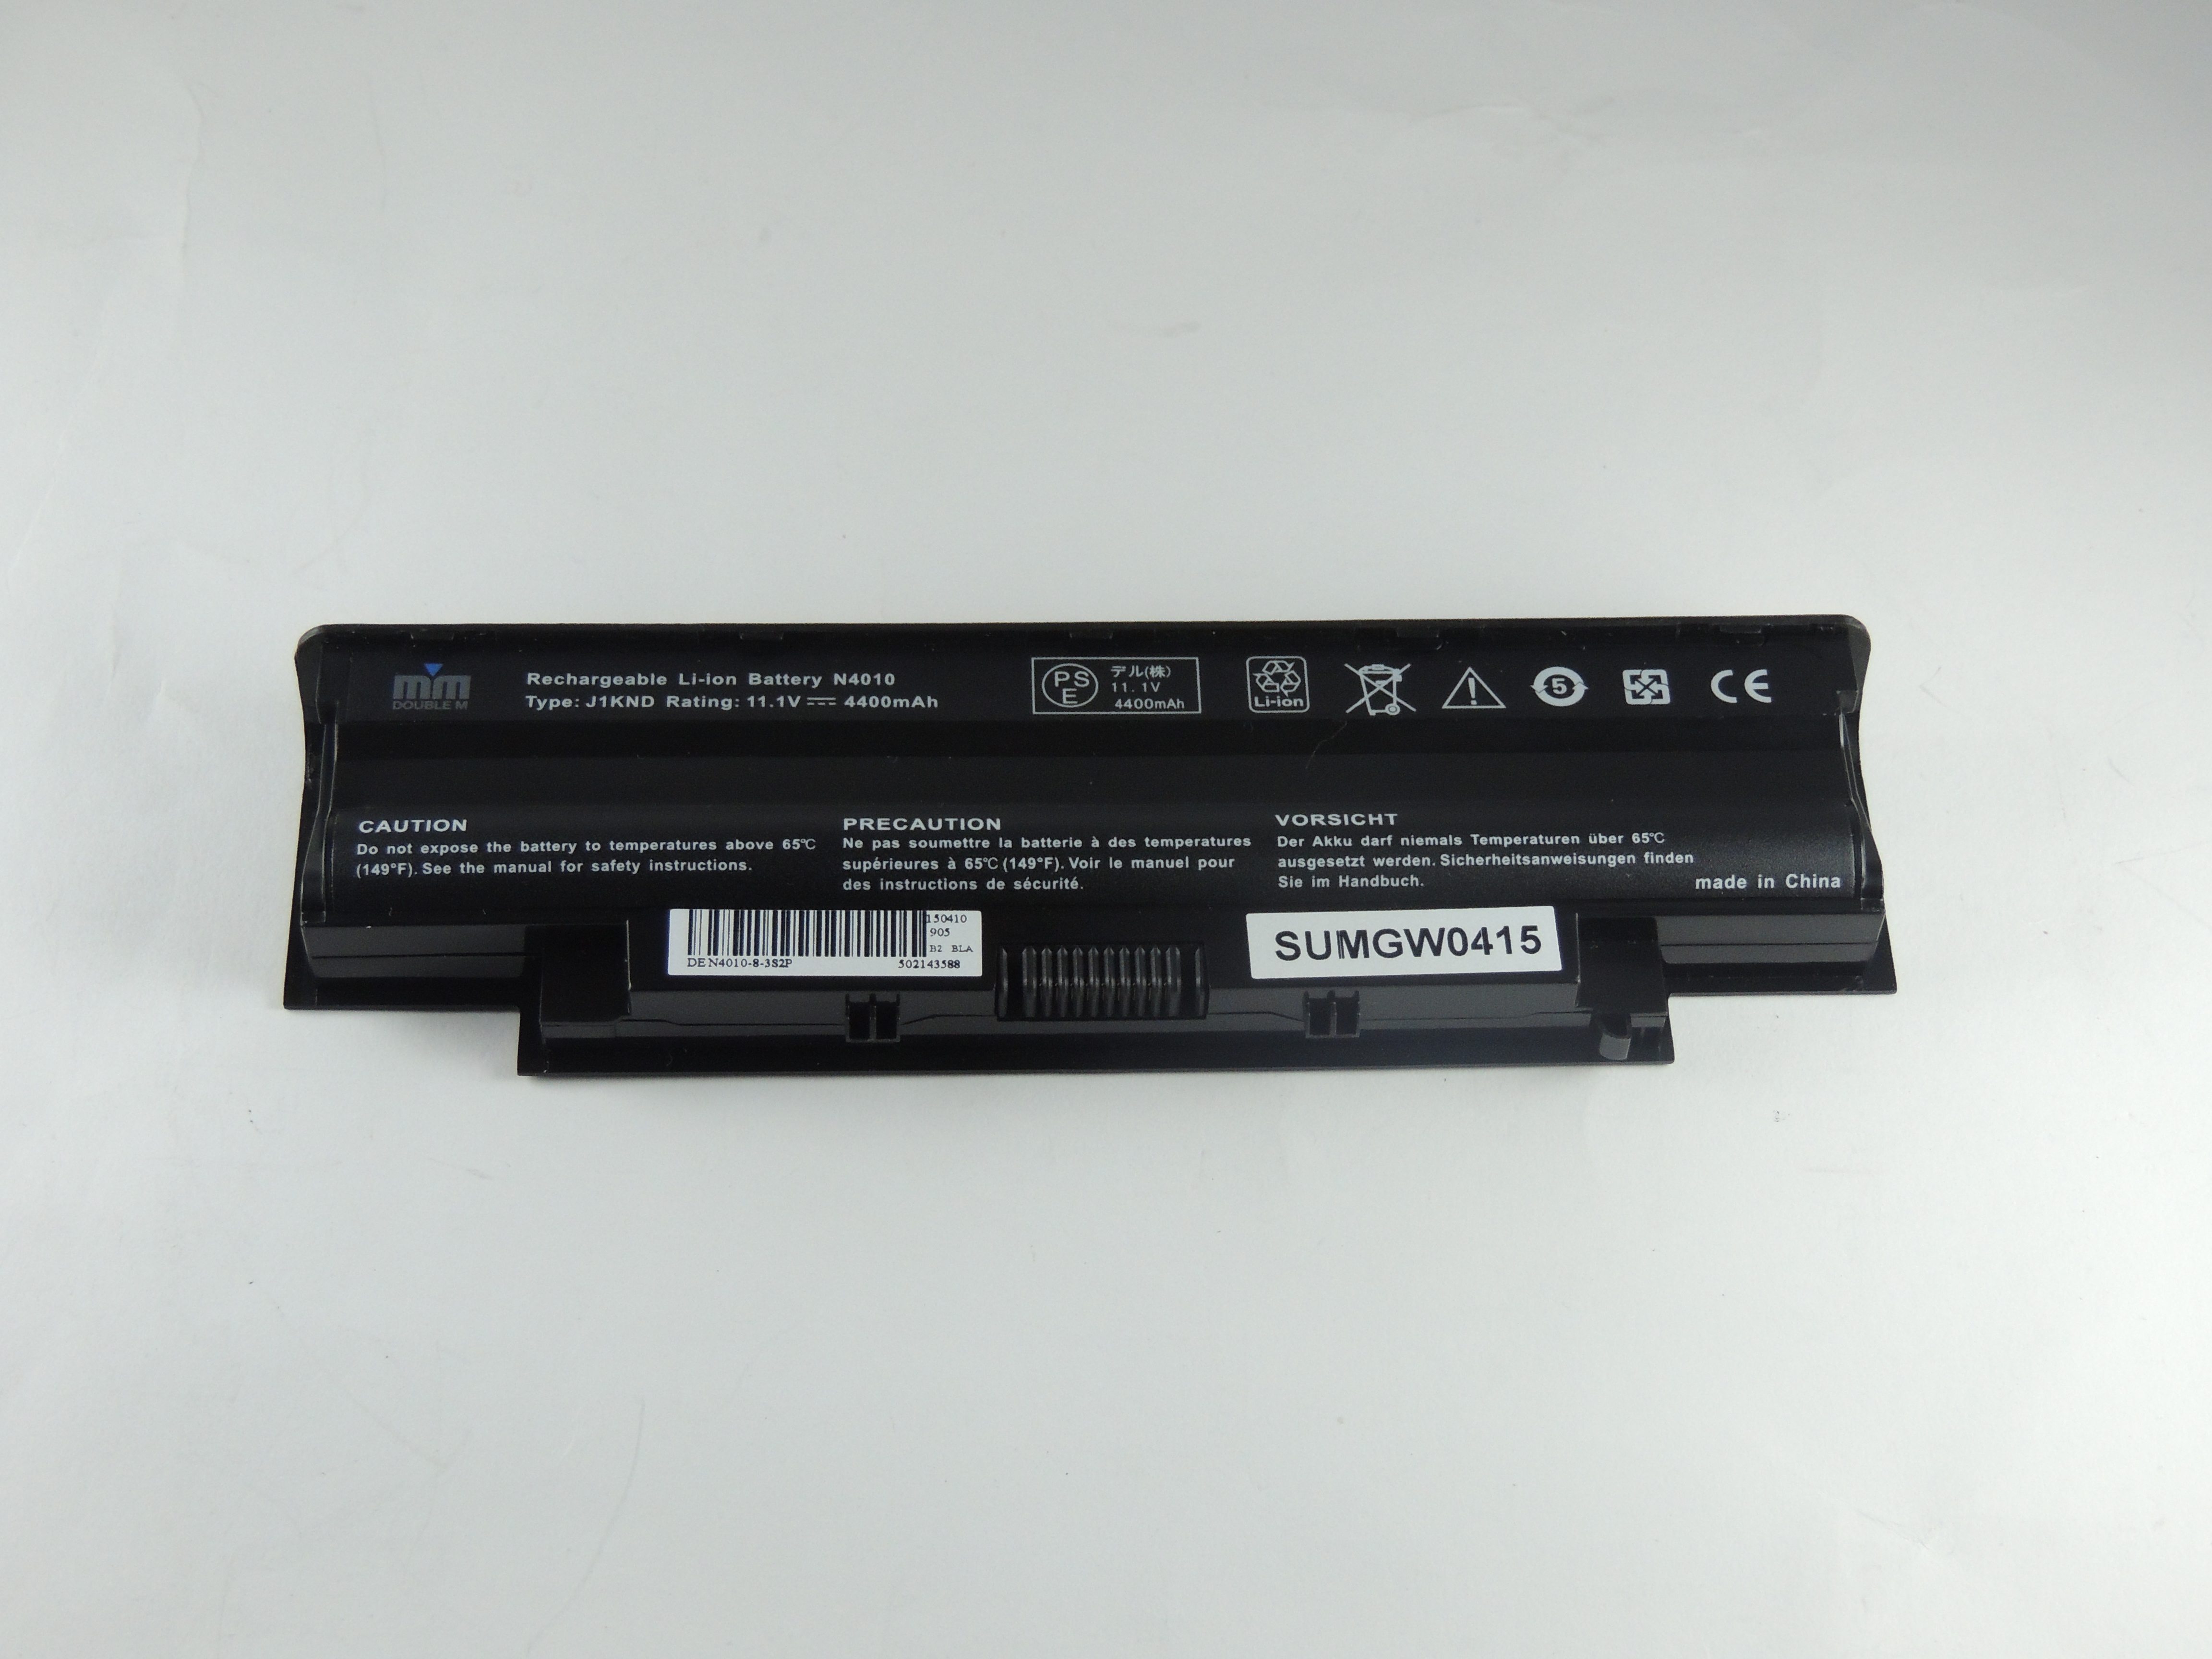 Dell j1knd battery